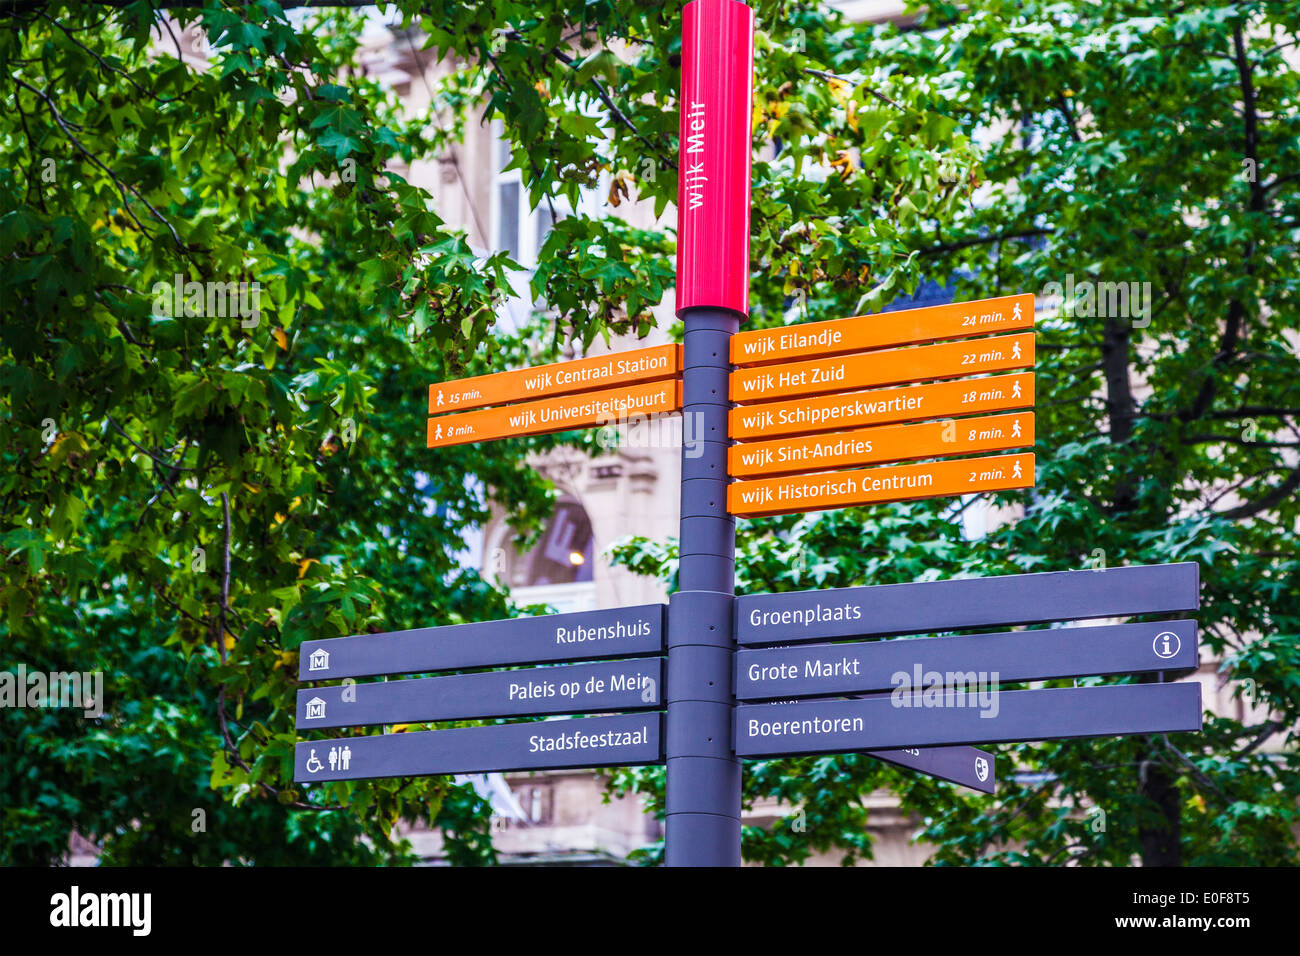 Signpost showing directions and walking times to various places of interest in Antwerp, belgium. Stock Photo